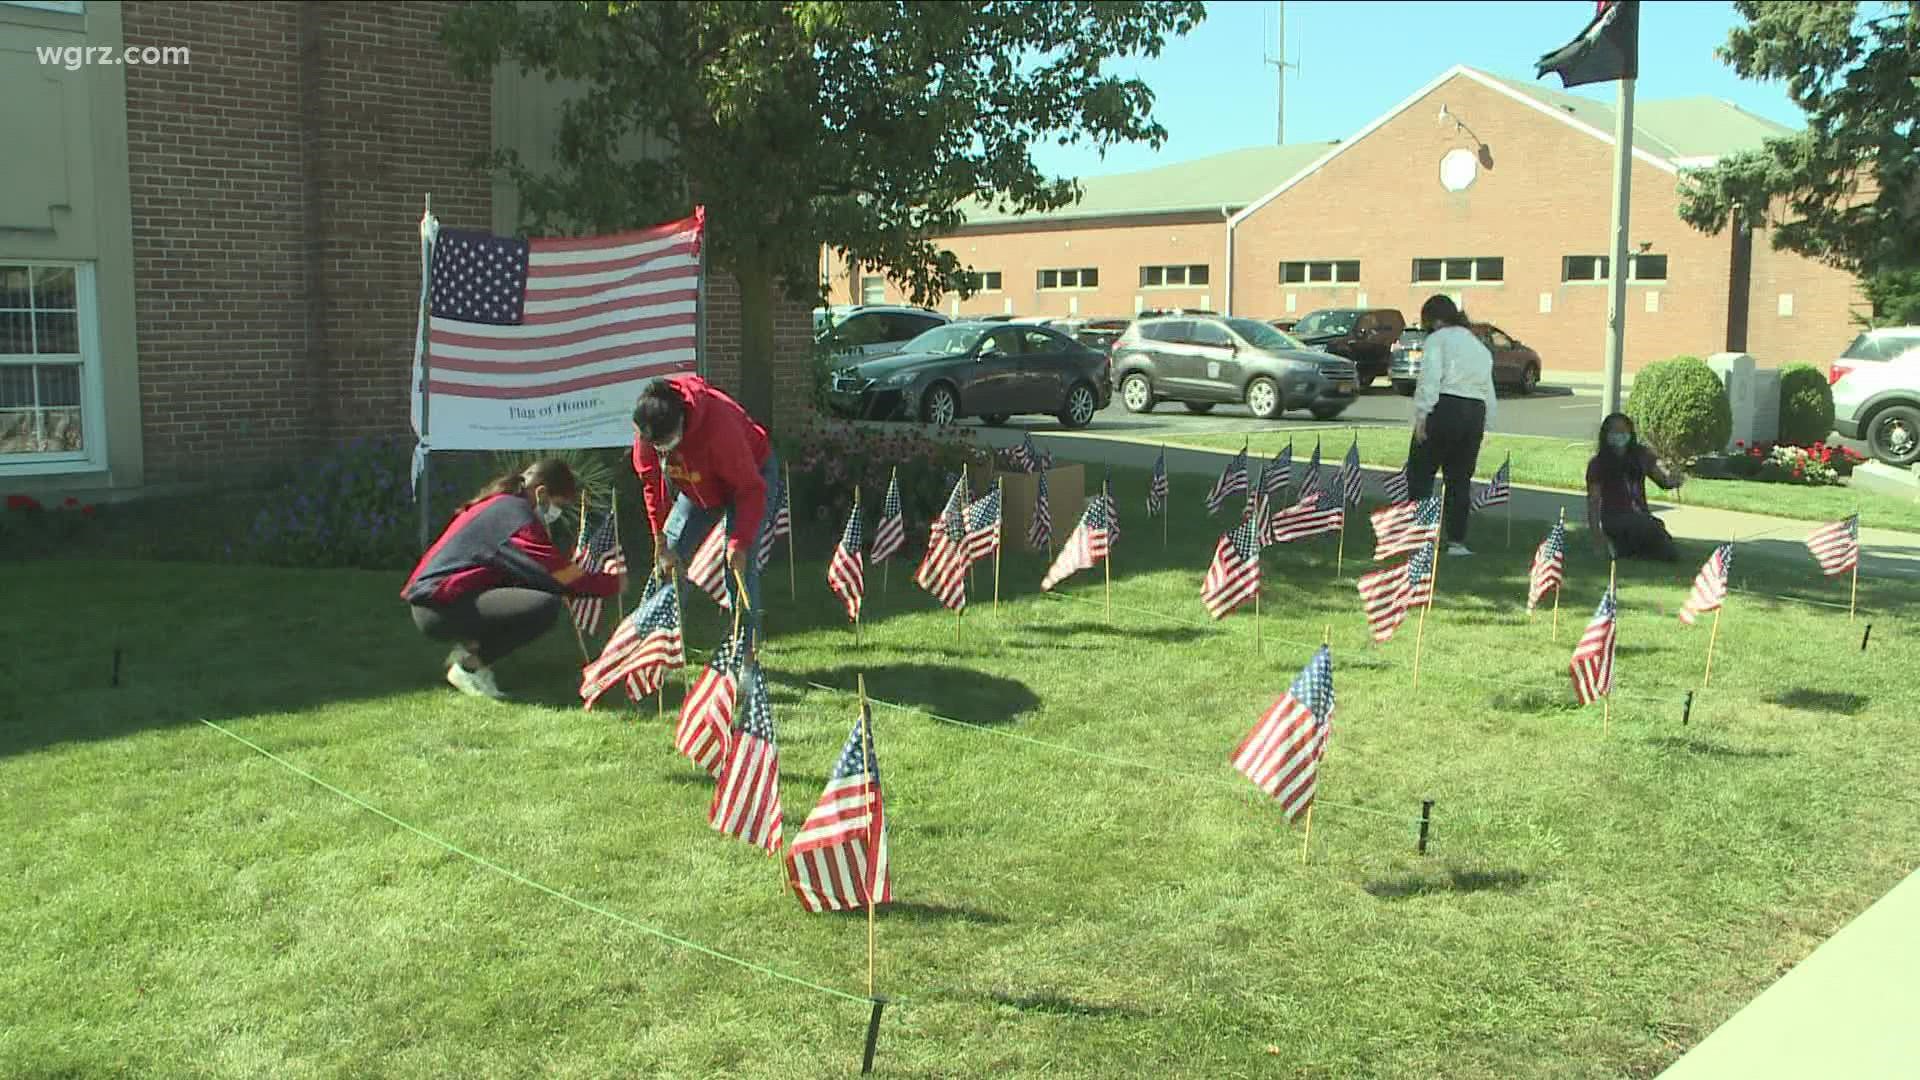 9/11 memorial being put up in Amherst